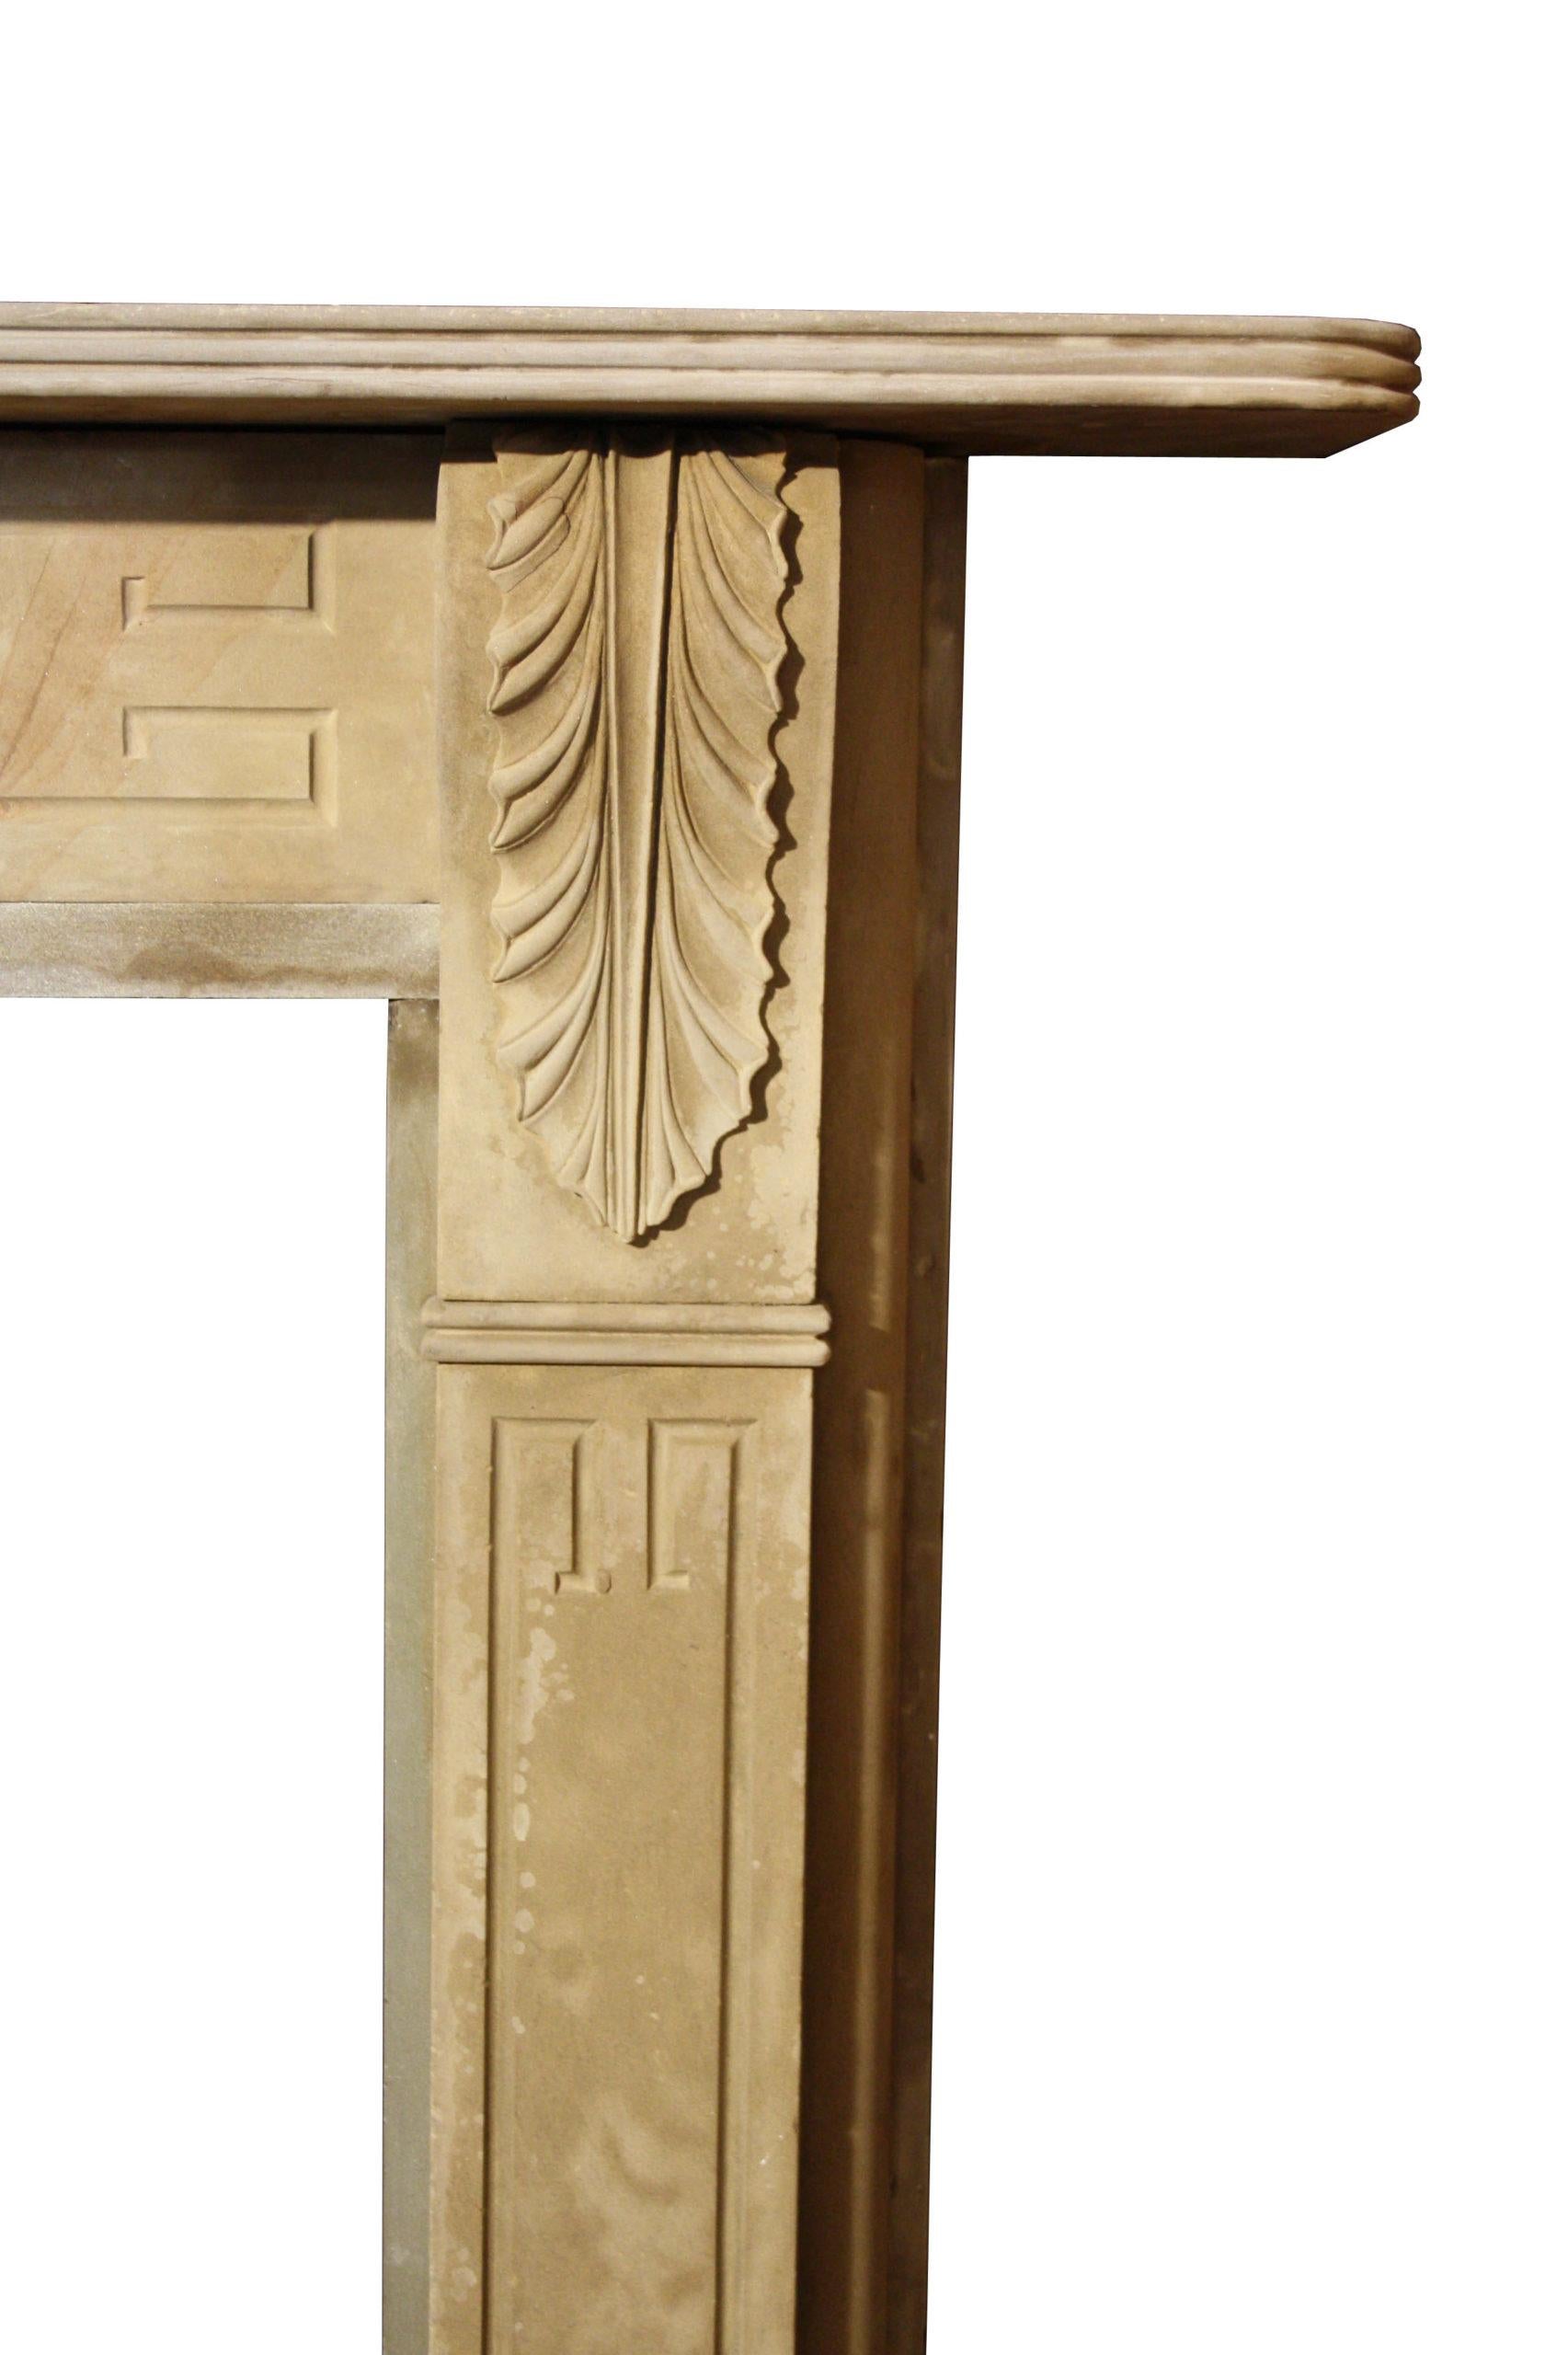 Antique Carved Regency Sandstone Mantel In Fair Condition For Sale In Wormelow, Herefordshire